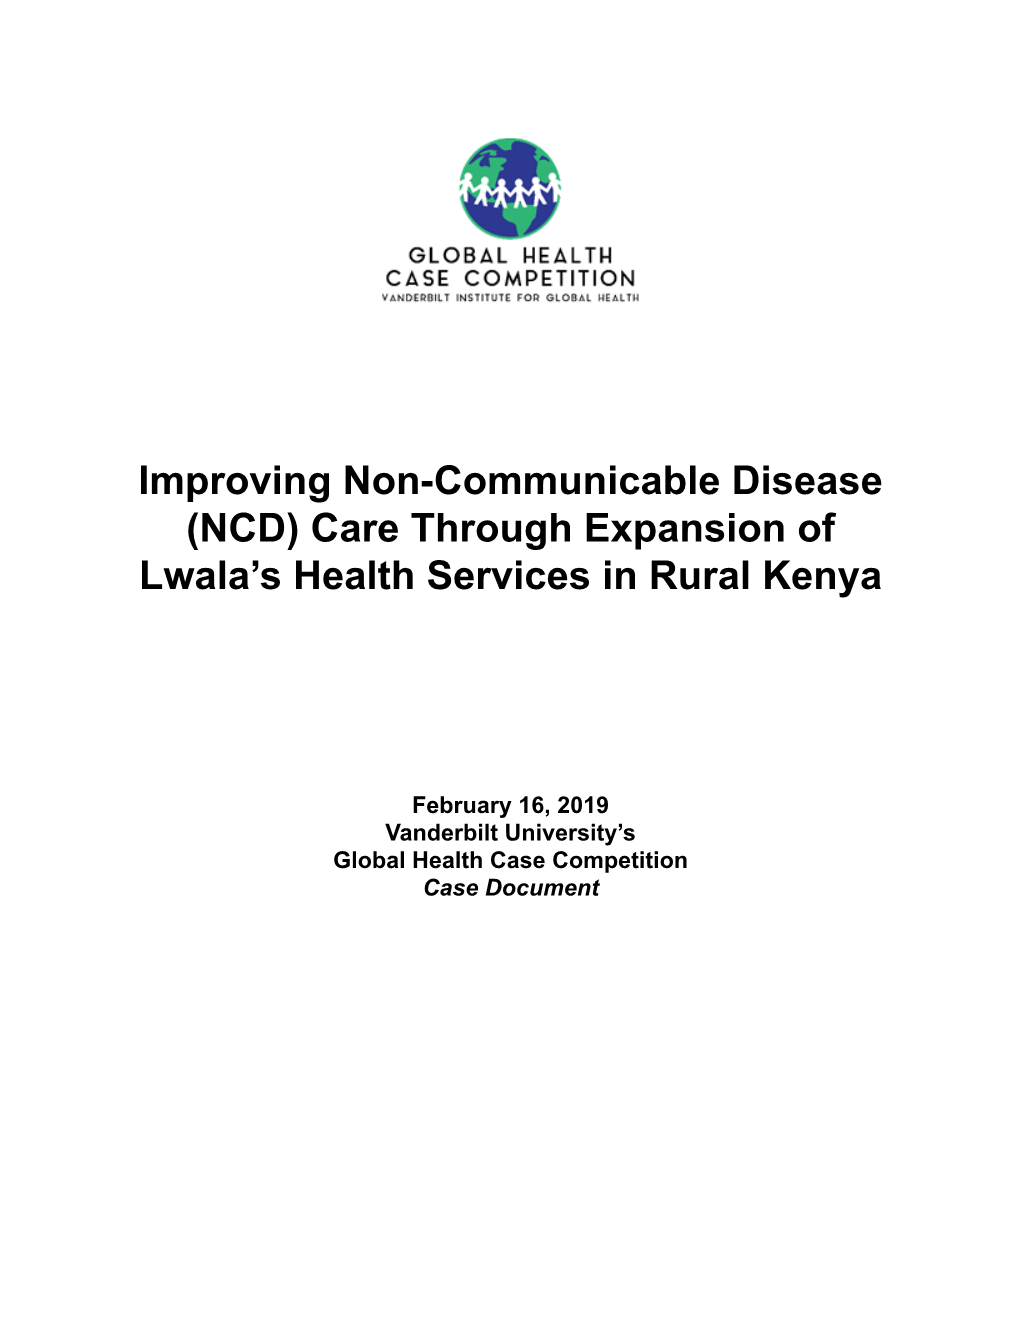 Improving Non-Communicable Disease (NCD) Care Through Expansion of Lwala’S Health Services in Rural Kenya